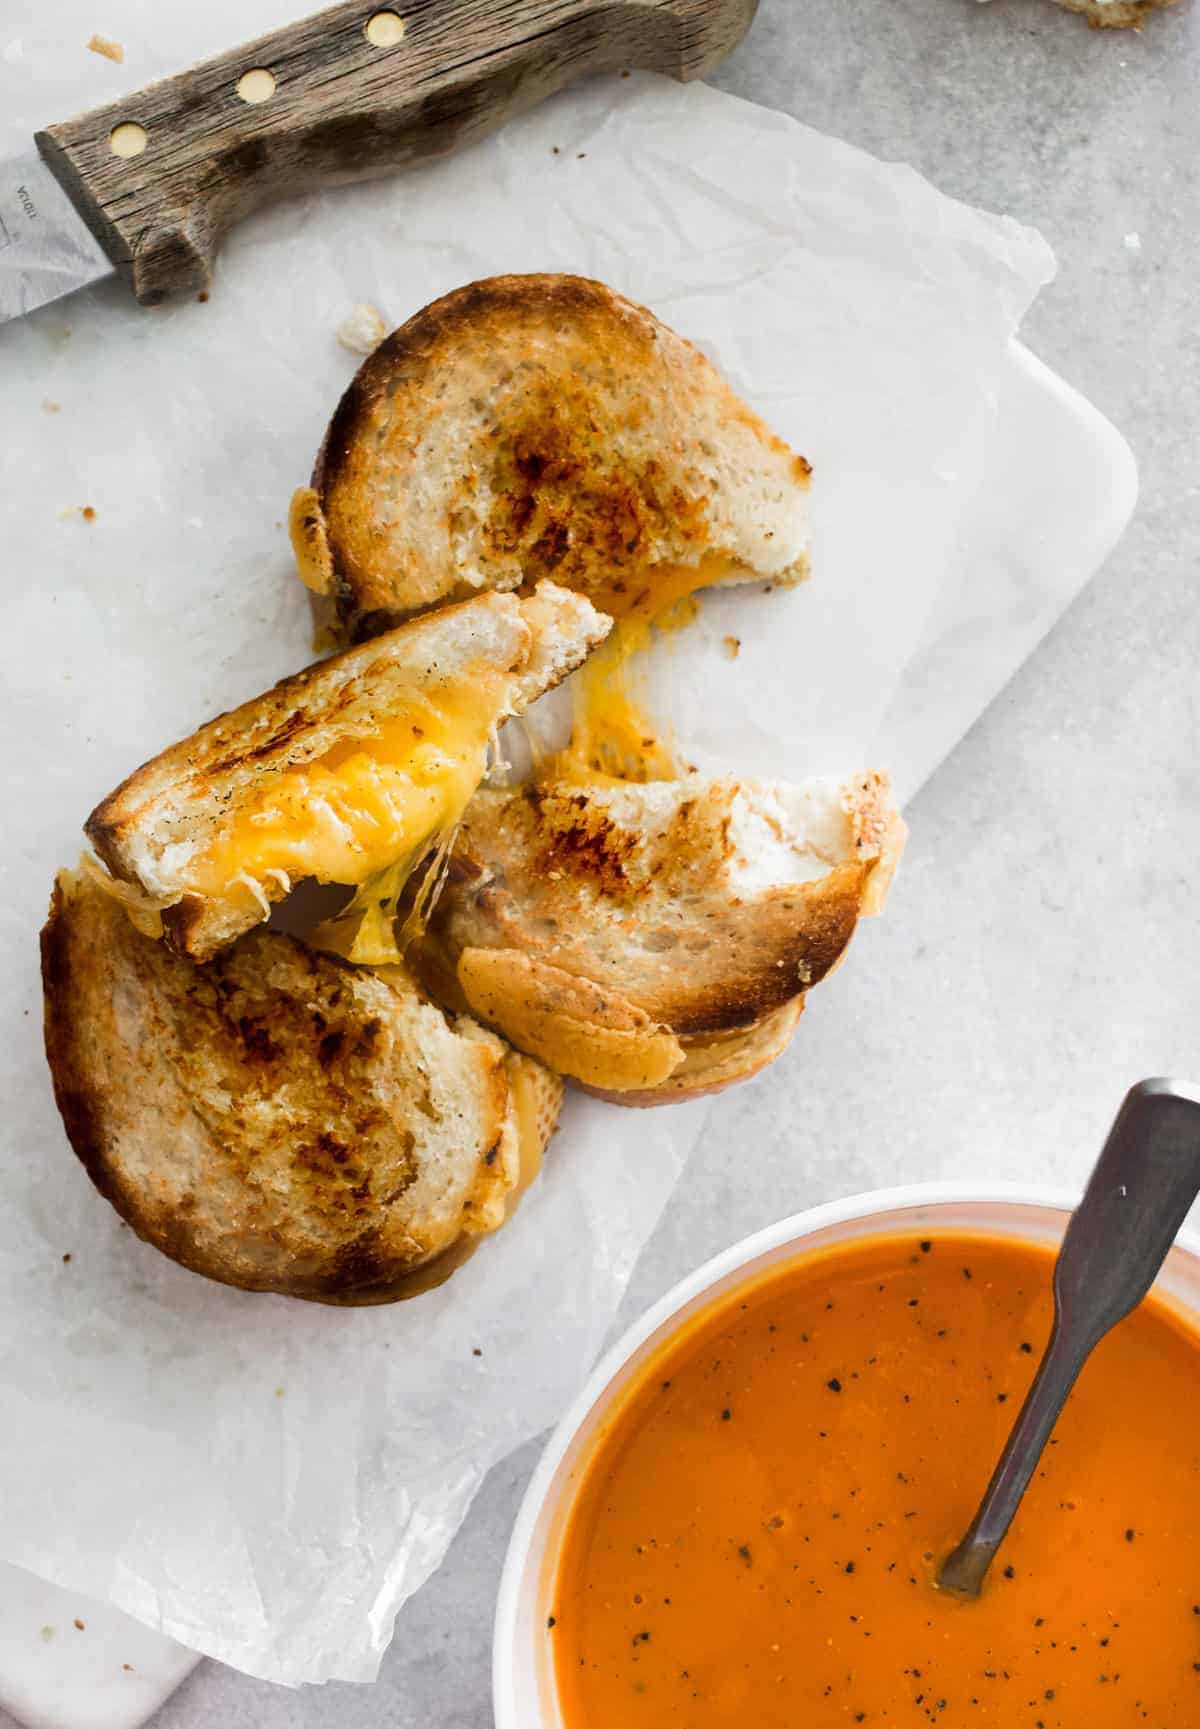 grilled cheese next to tomato soup